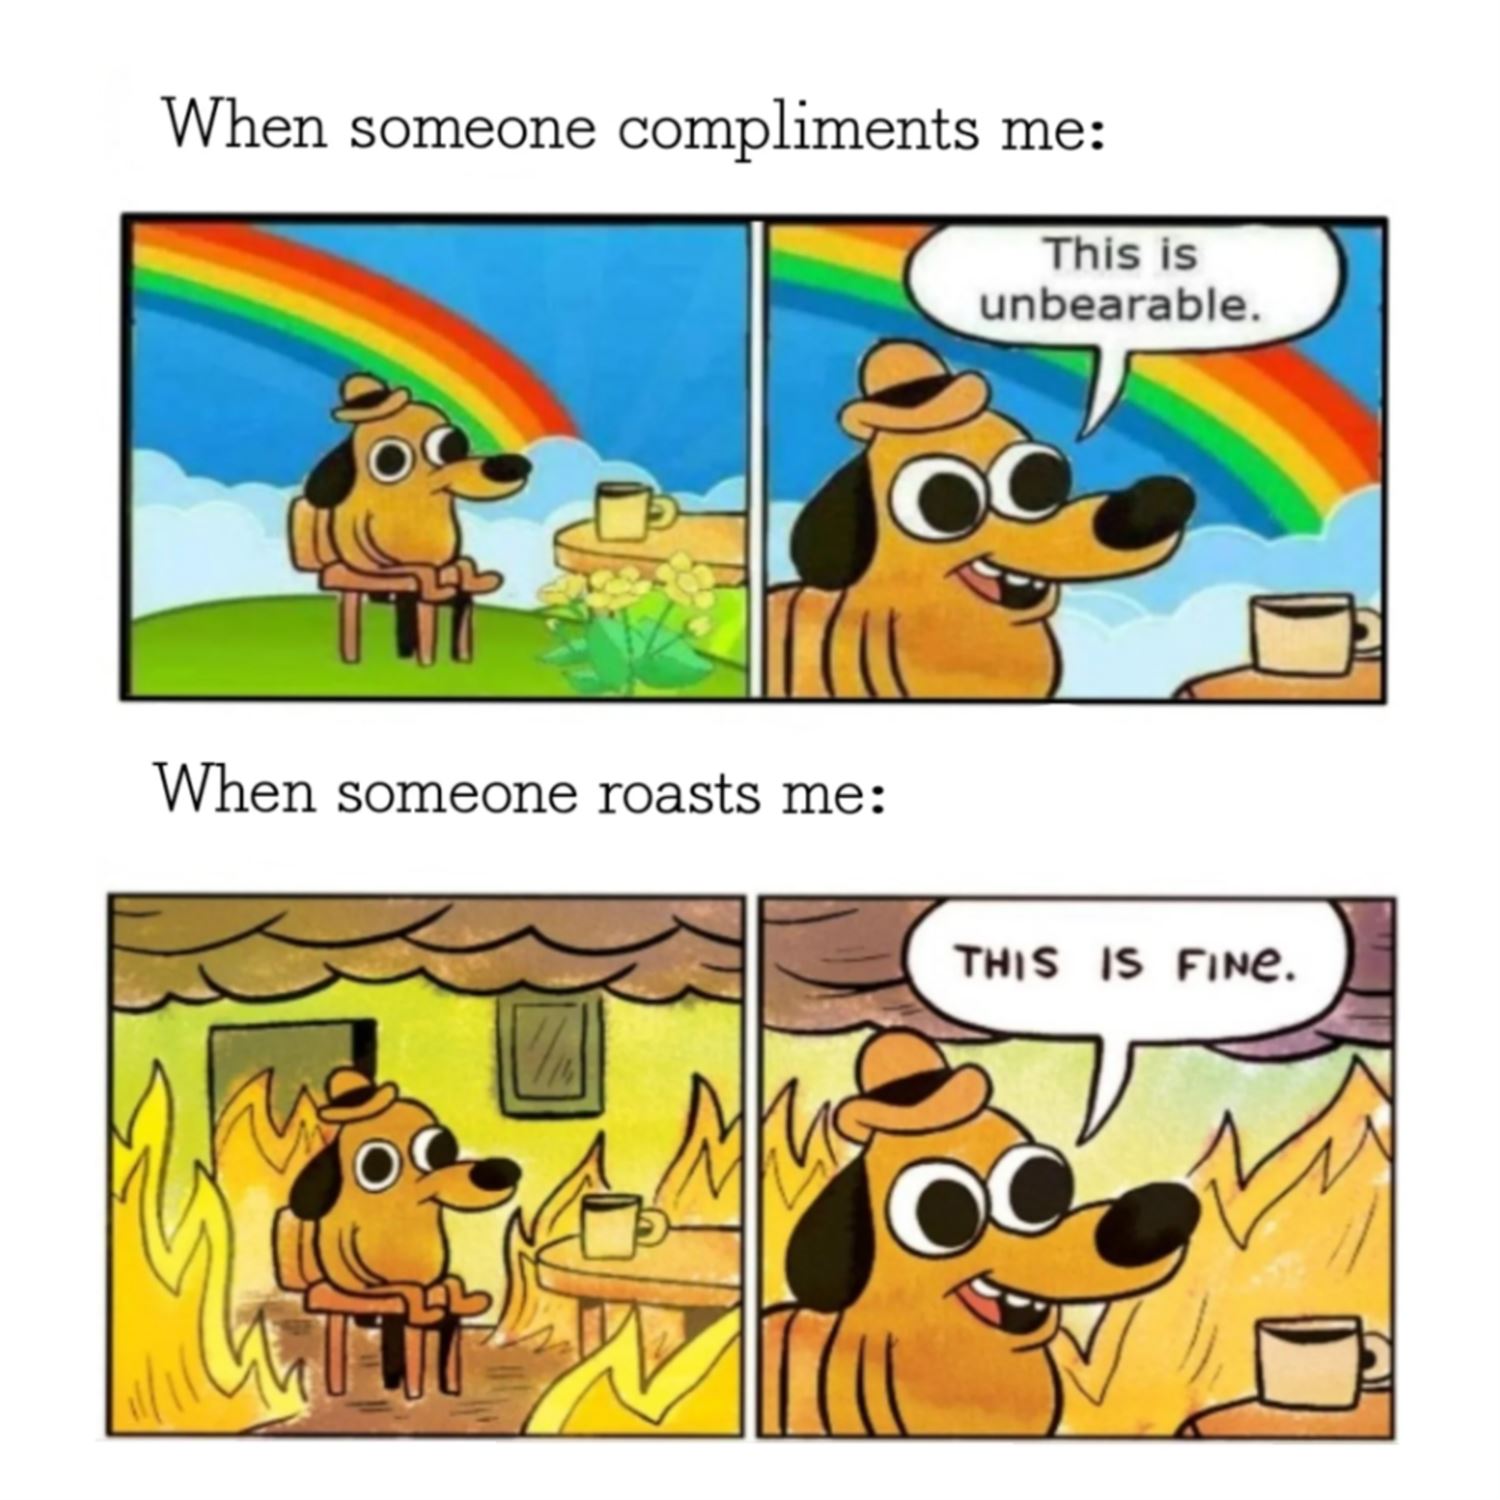 Taking a compliment